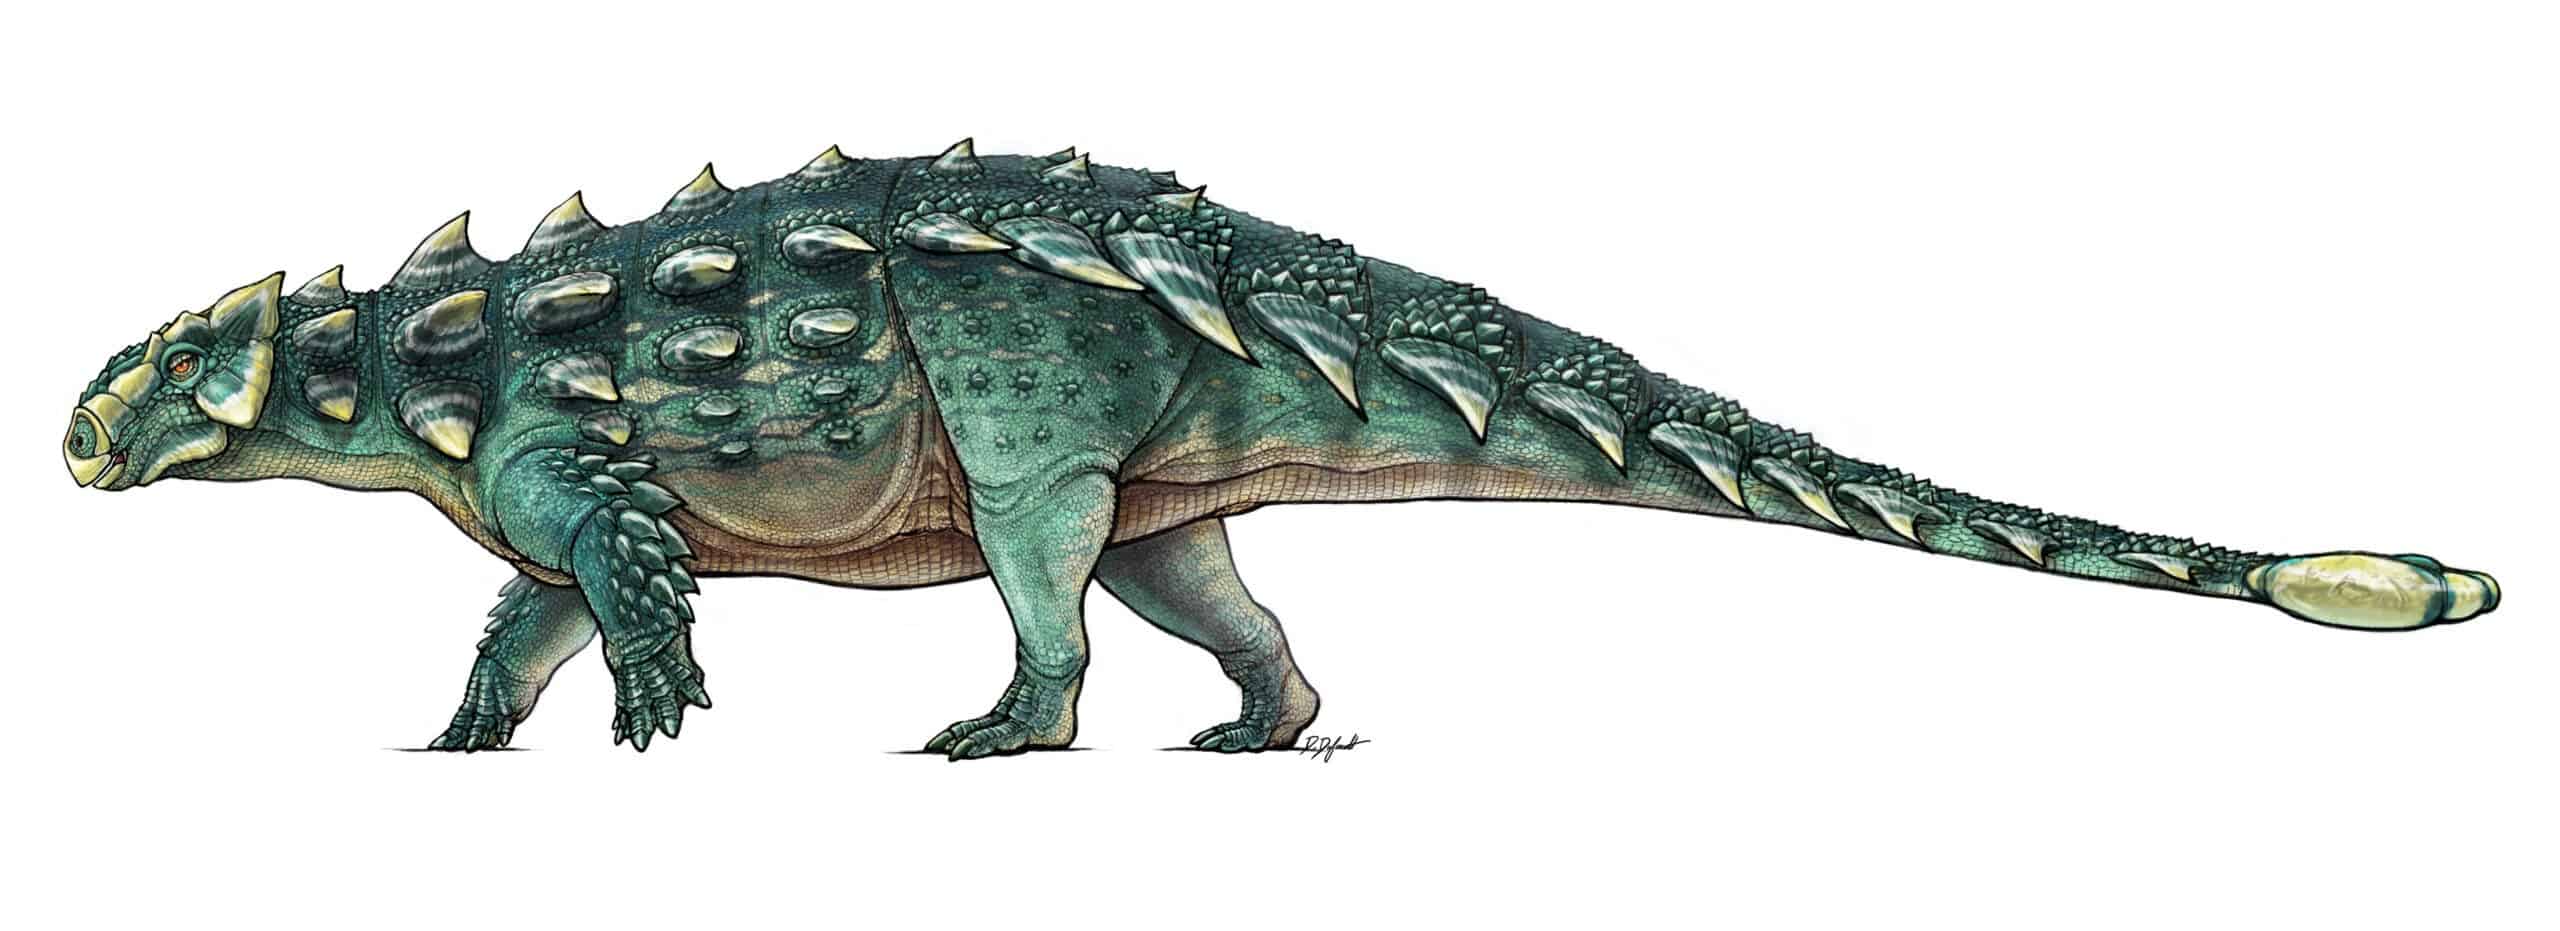 Feisty ankylosaurs clubbed each other with their tails